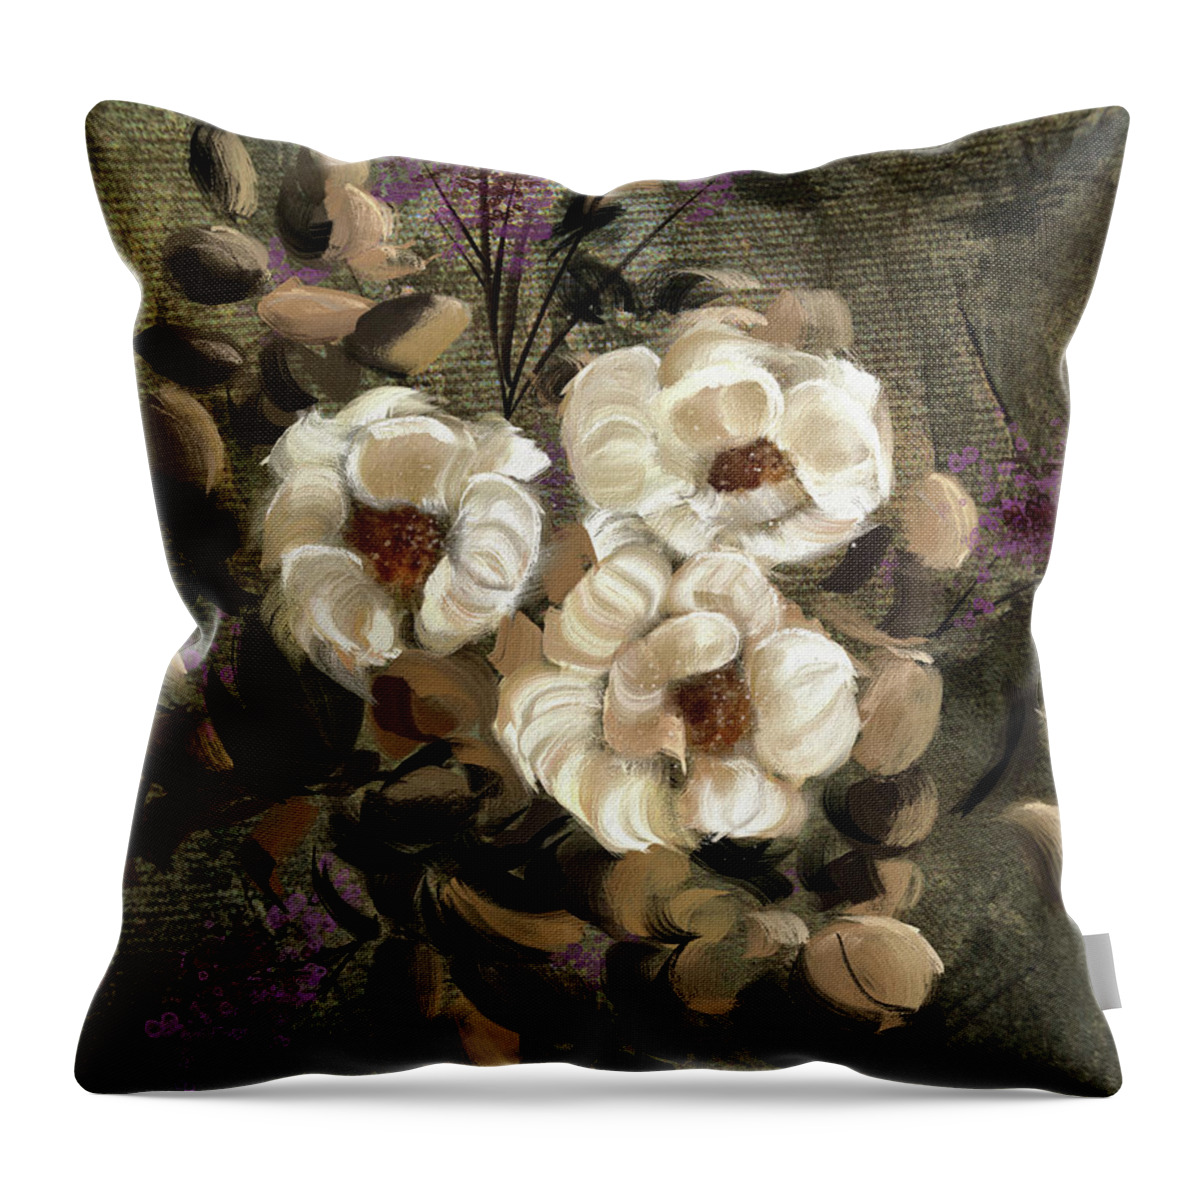 Flower Throw Pillow featuring the digital art White Roses by Lois Bryan